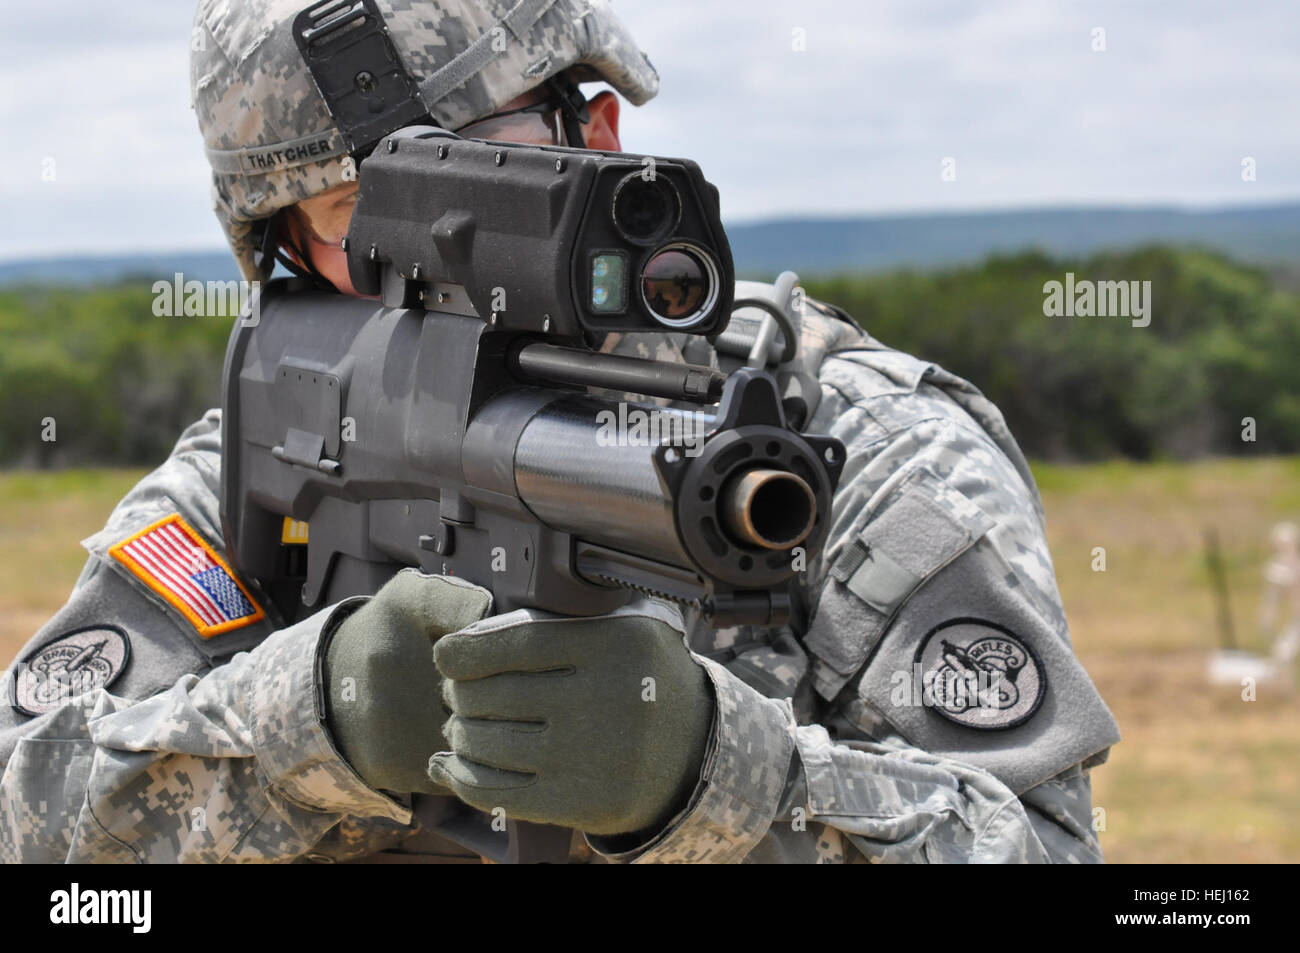 Flickr - The U.S. Army - Testing the new XM-25 weapon system Stock Photo